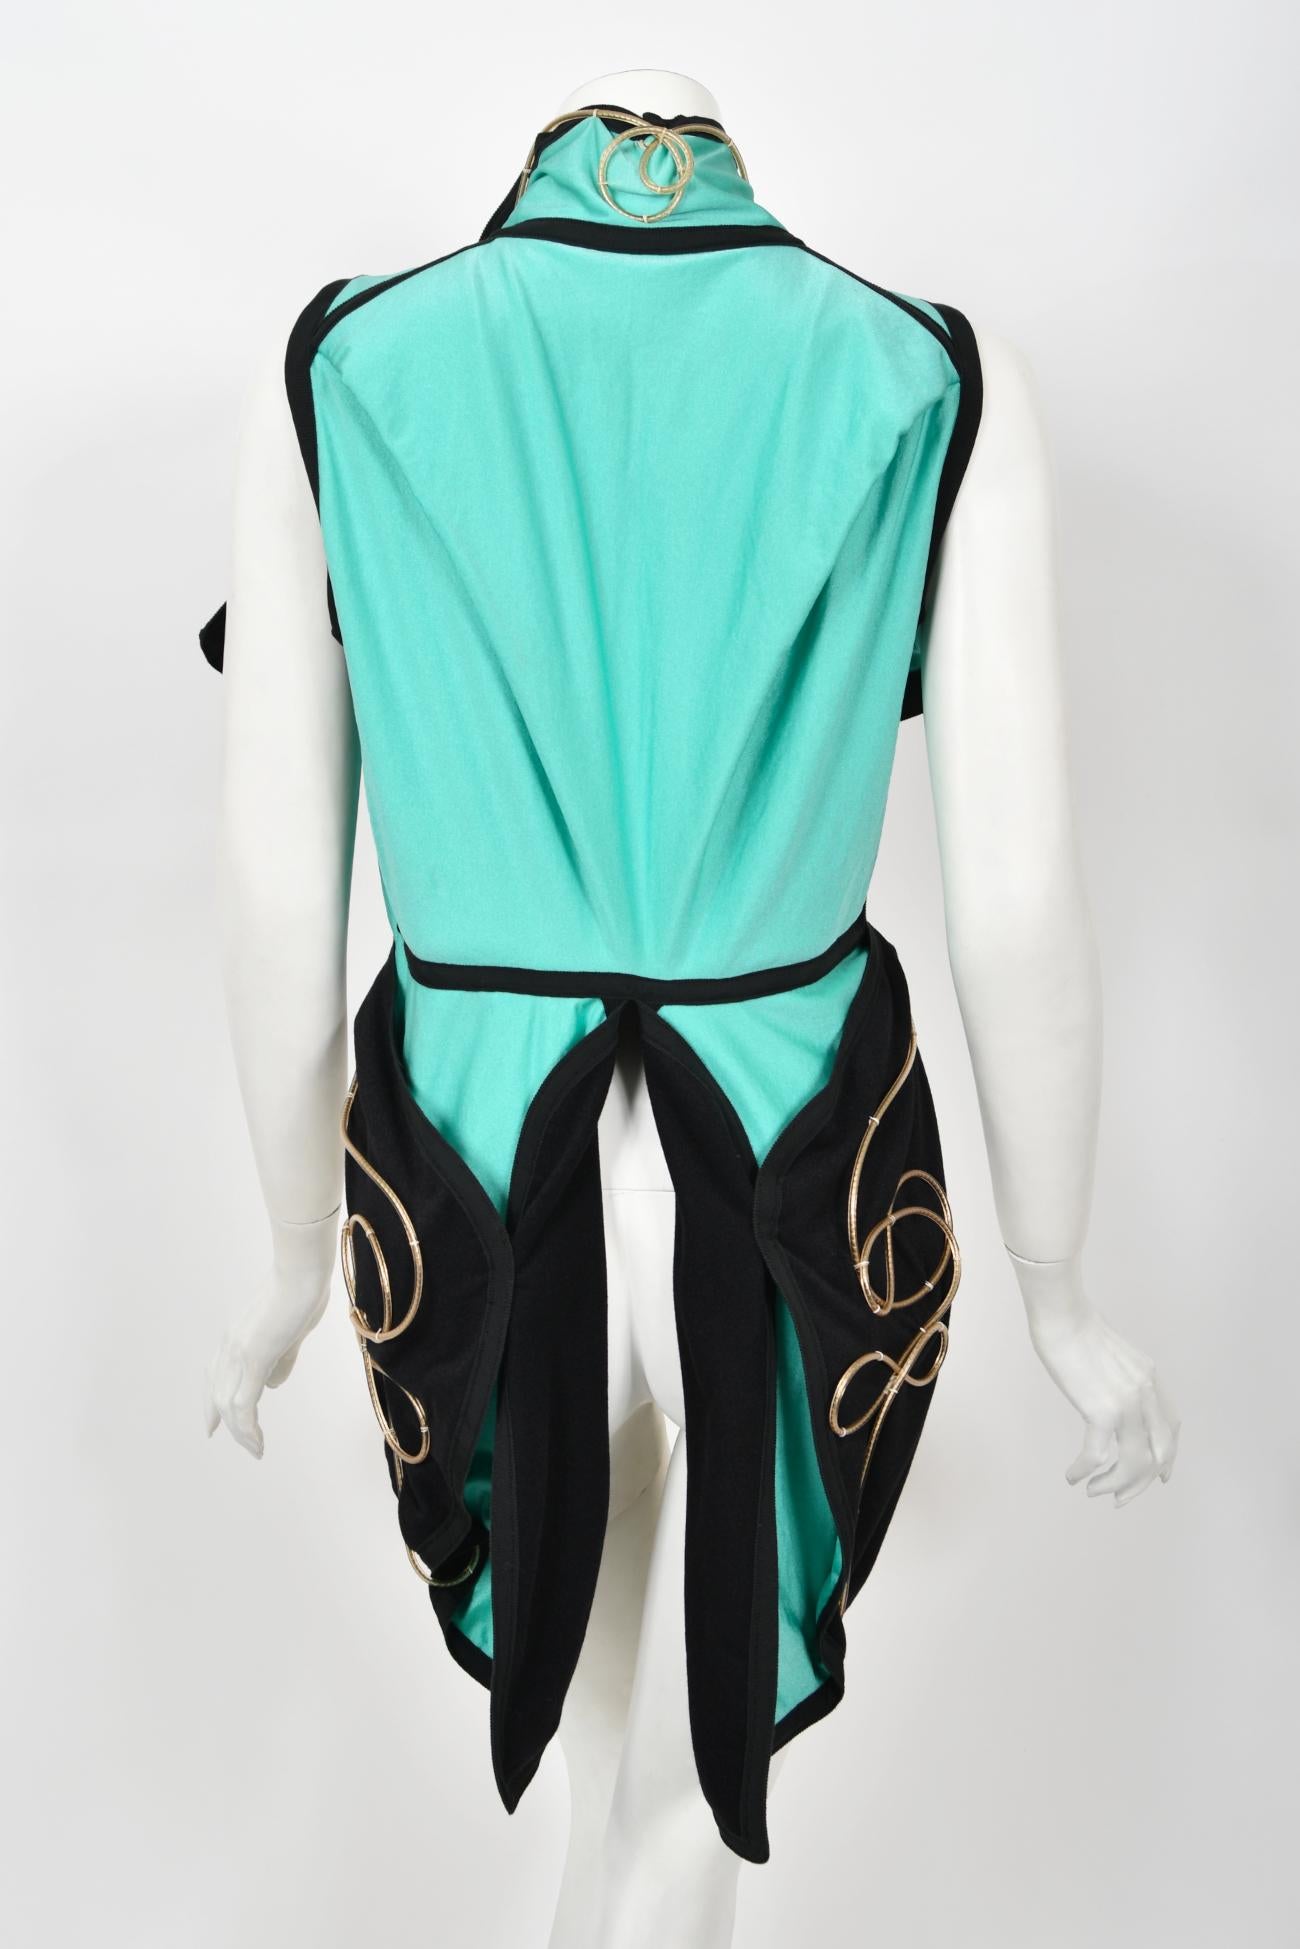 1991 John Galliano Documented Runway Black & Blue Military Inspired Cropped Vest 7